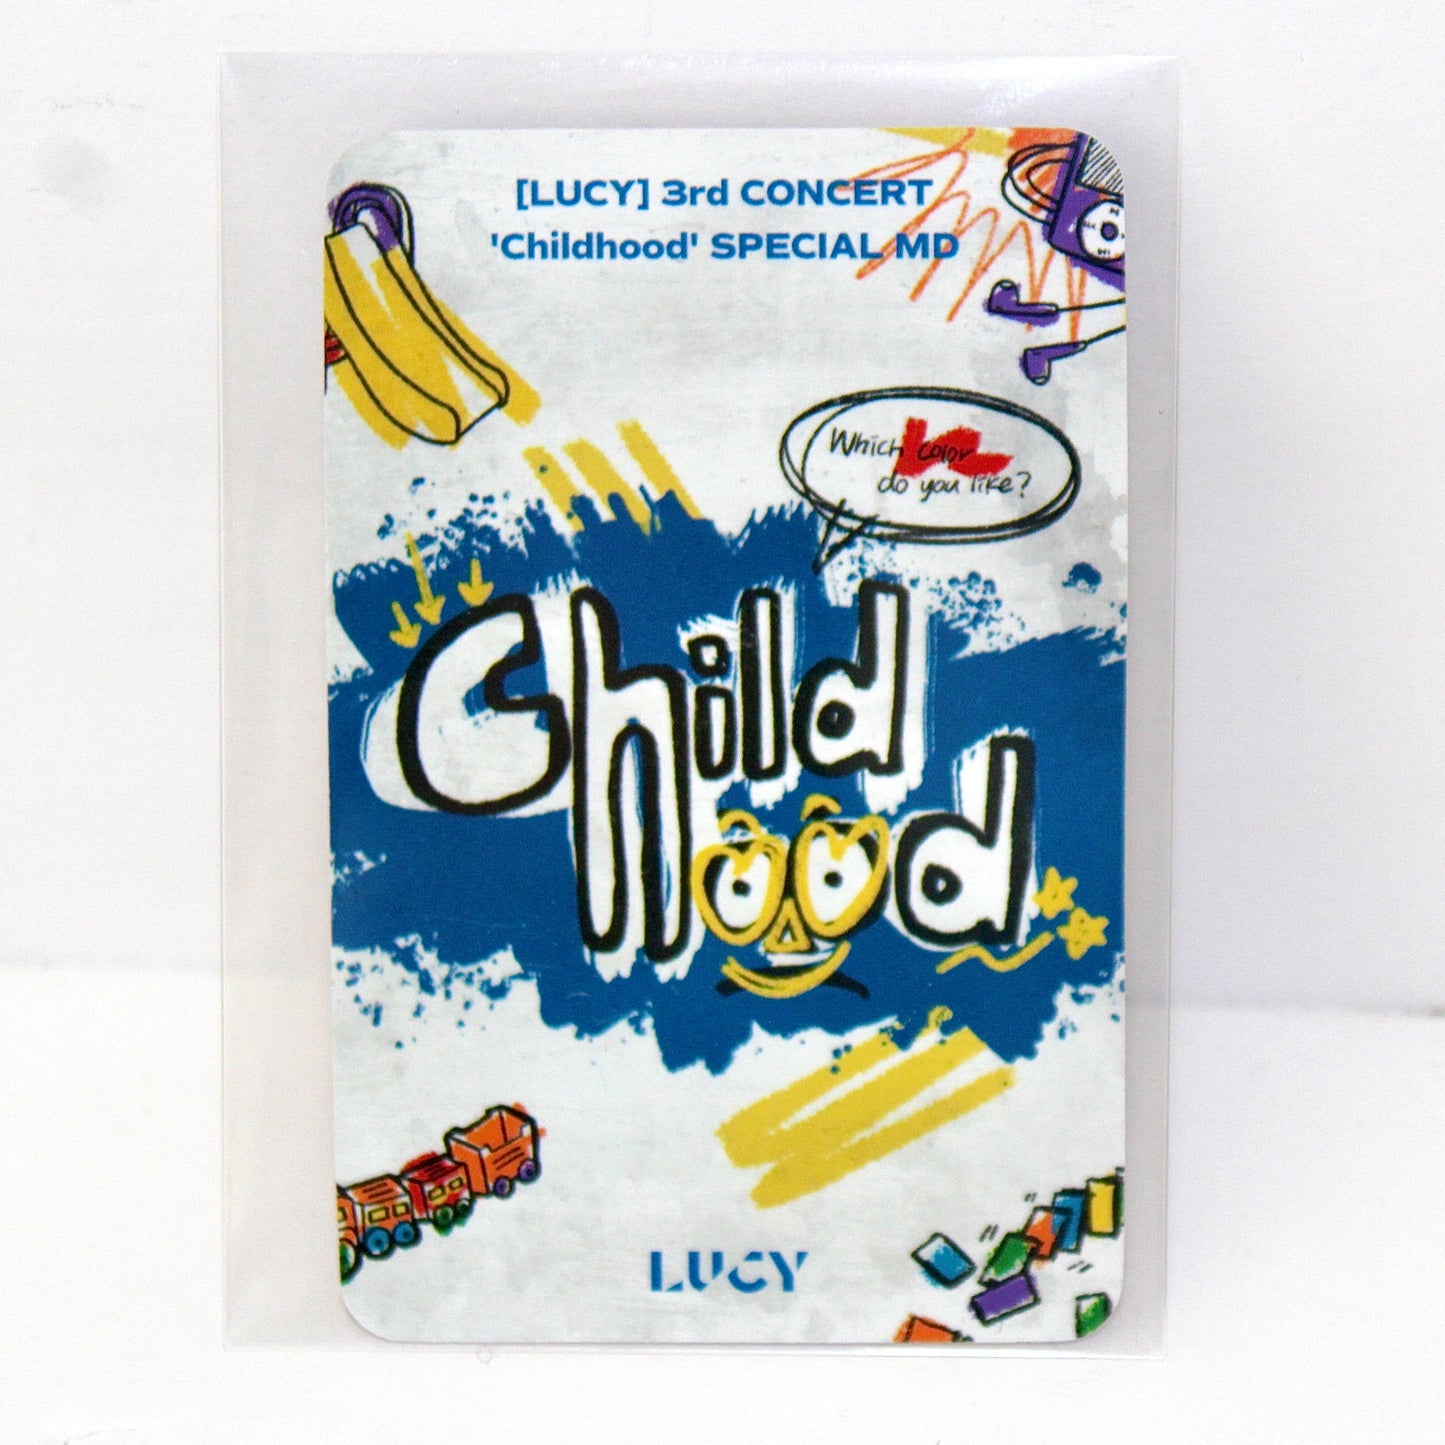 LUCY 3rd Concert "Childhood" | Special MD